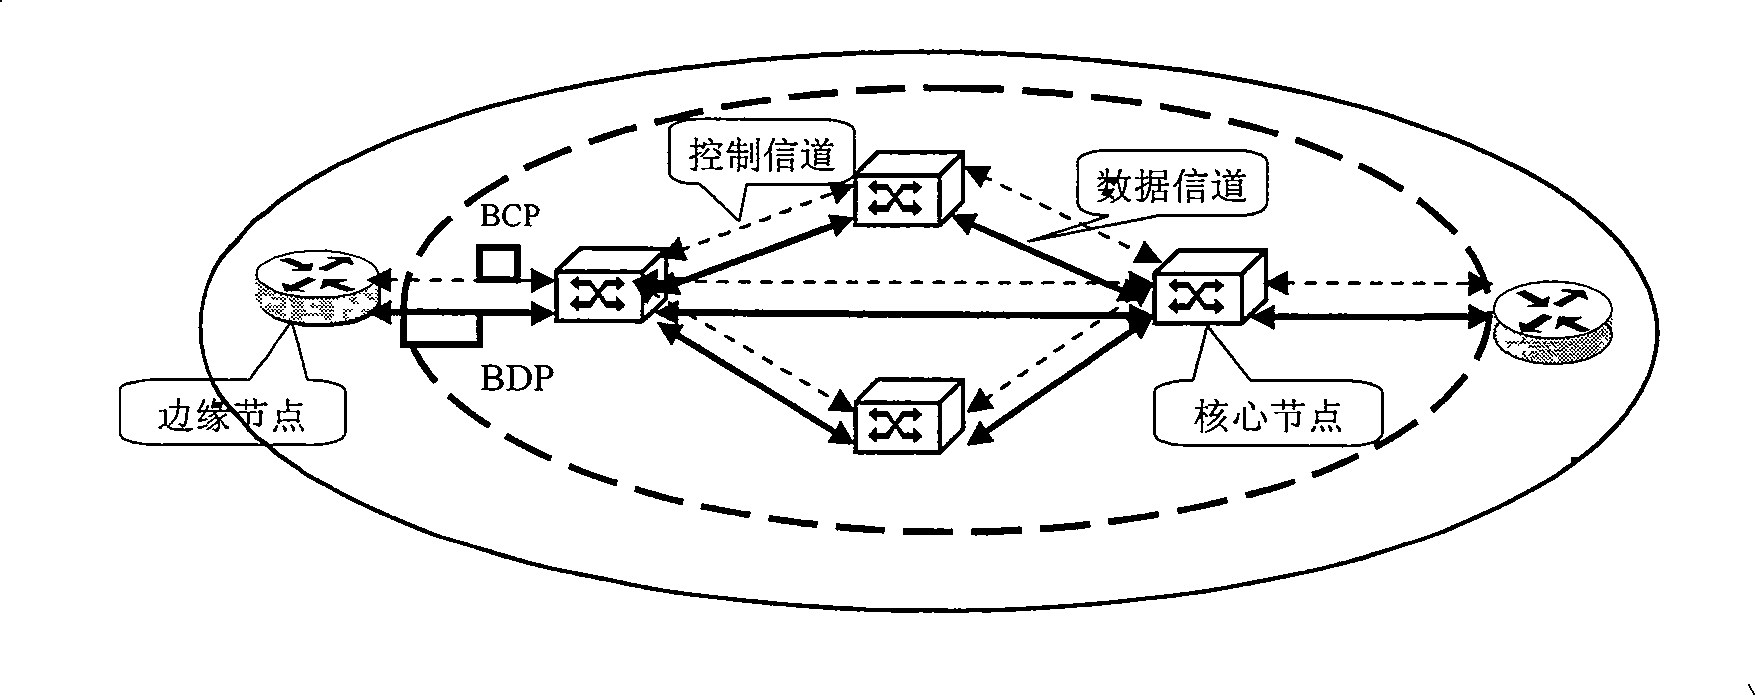 Network configuration for loading high-speed data business and trans mitting method